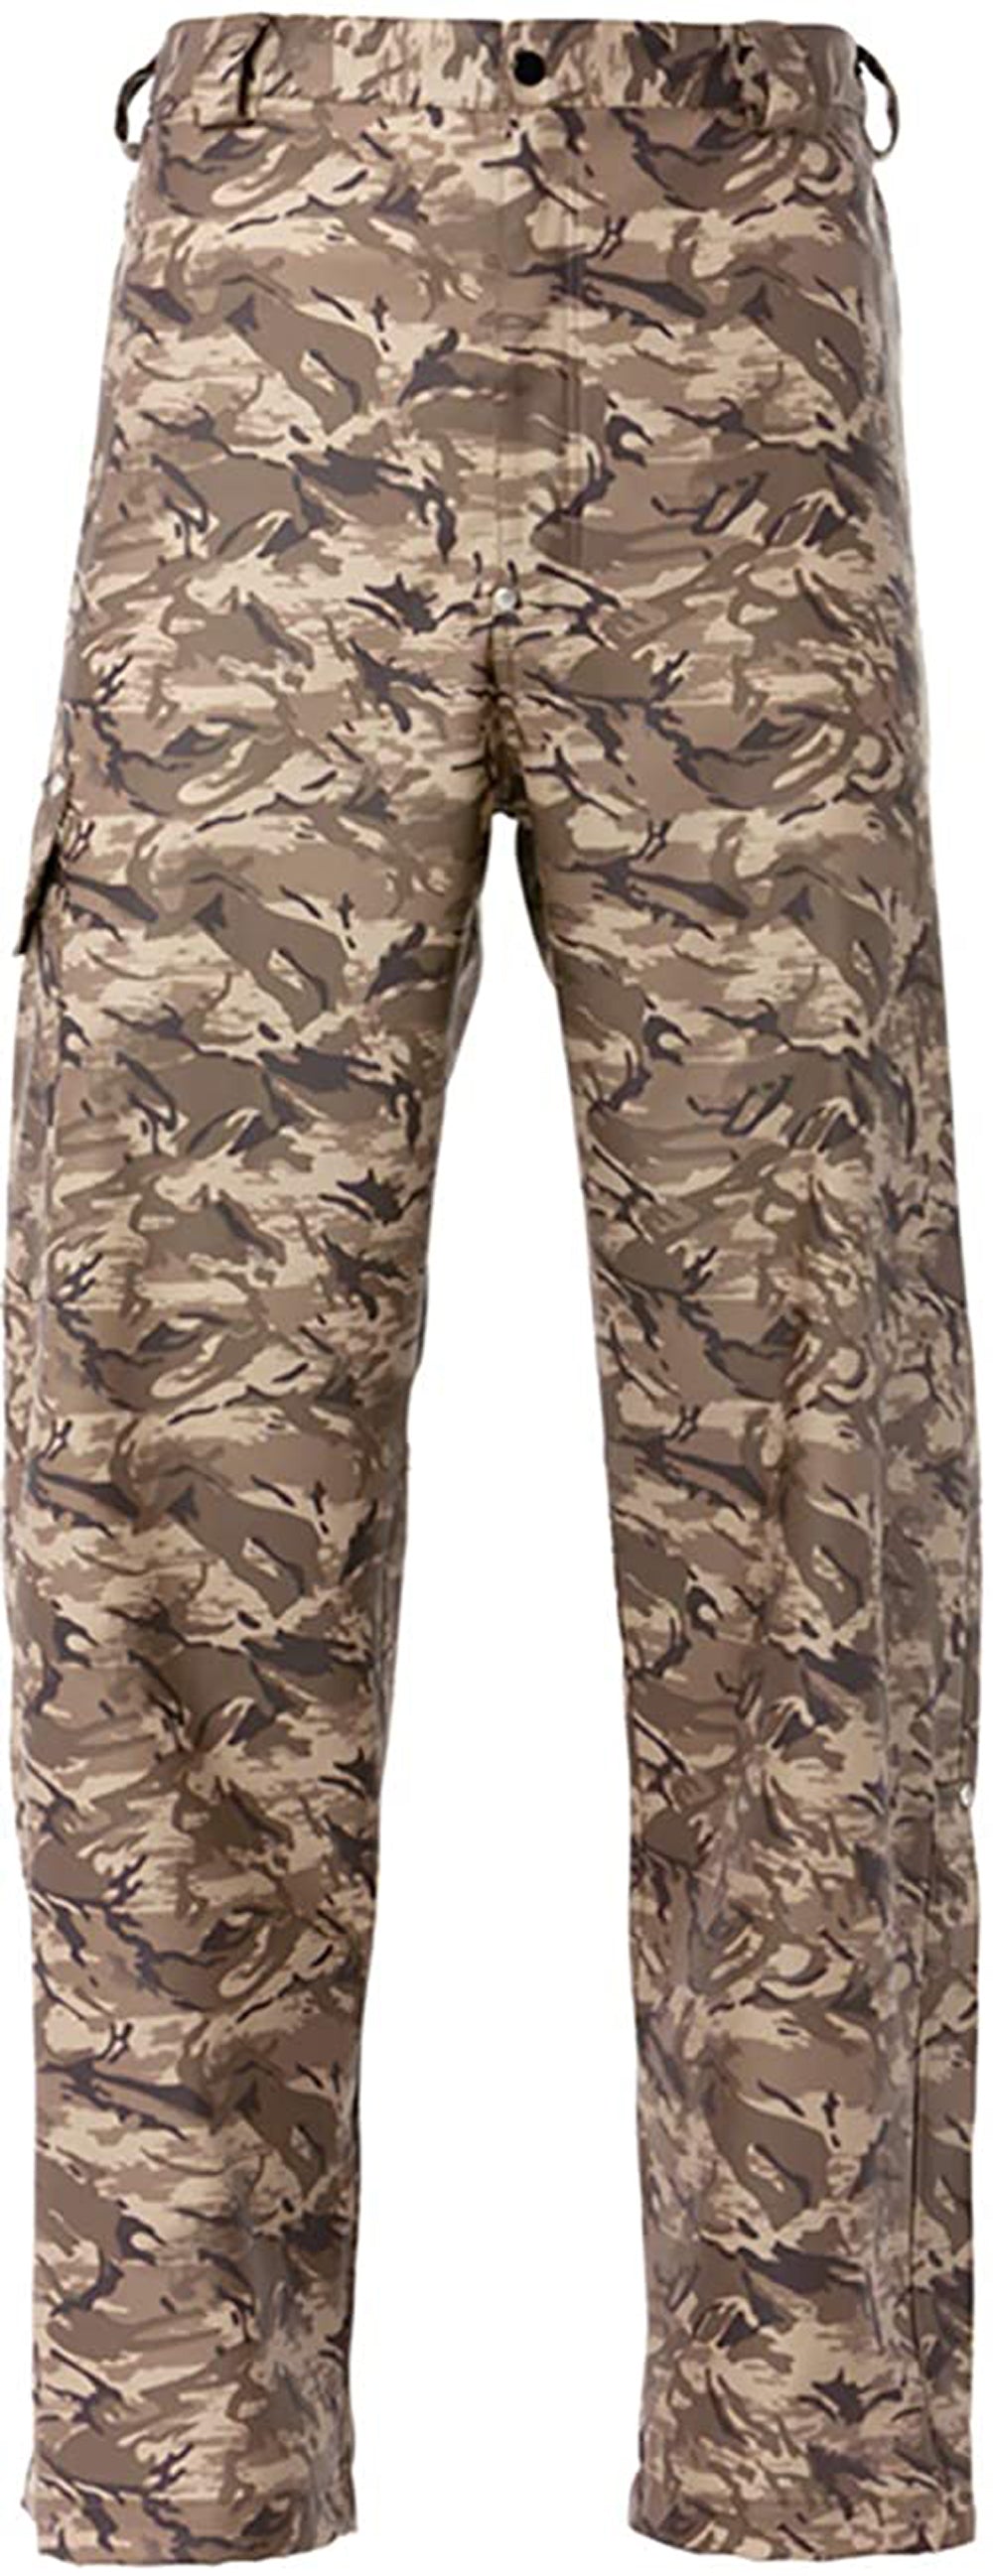 Neptune Pant in Refraction Camo Stone color